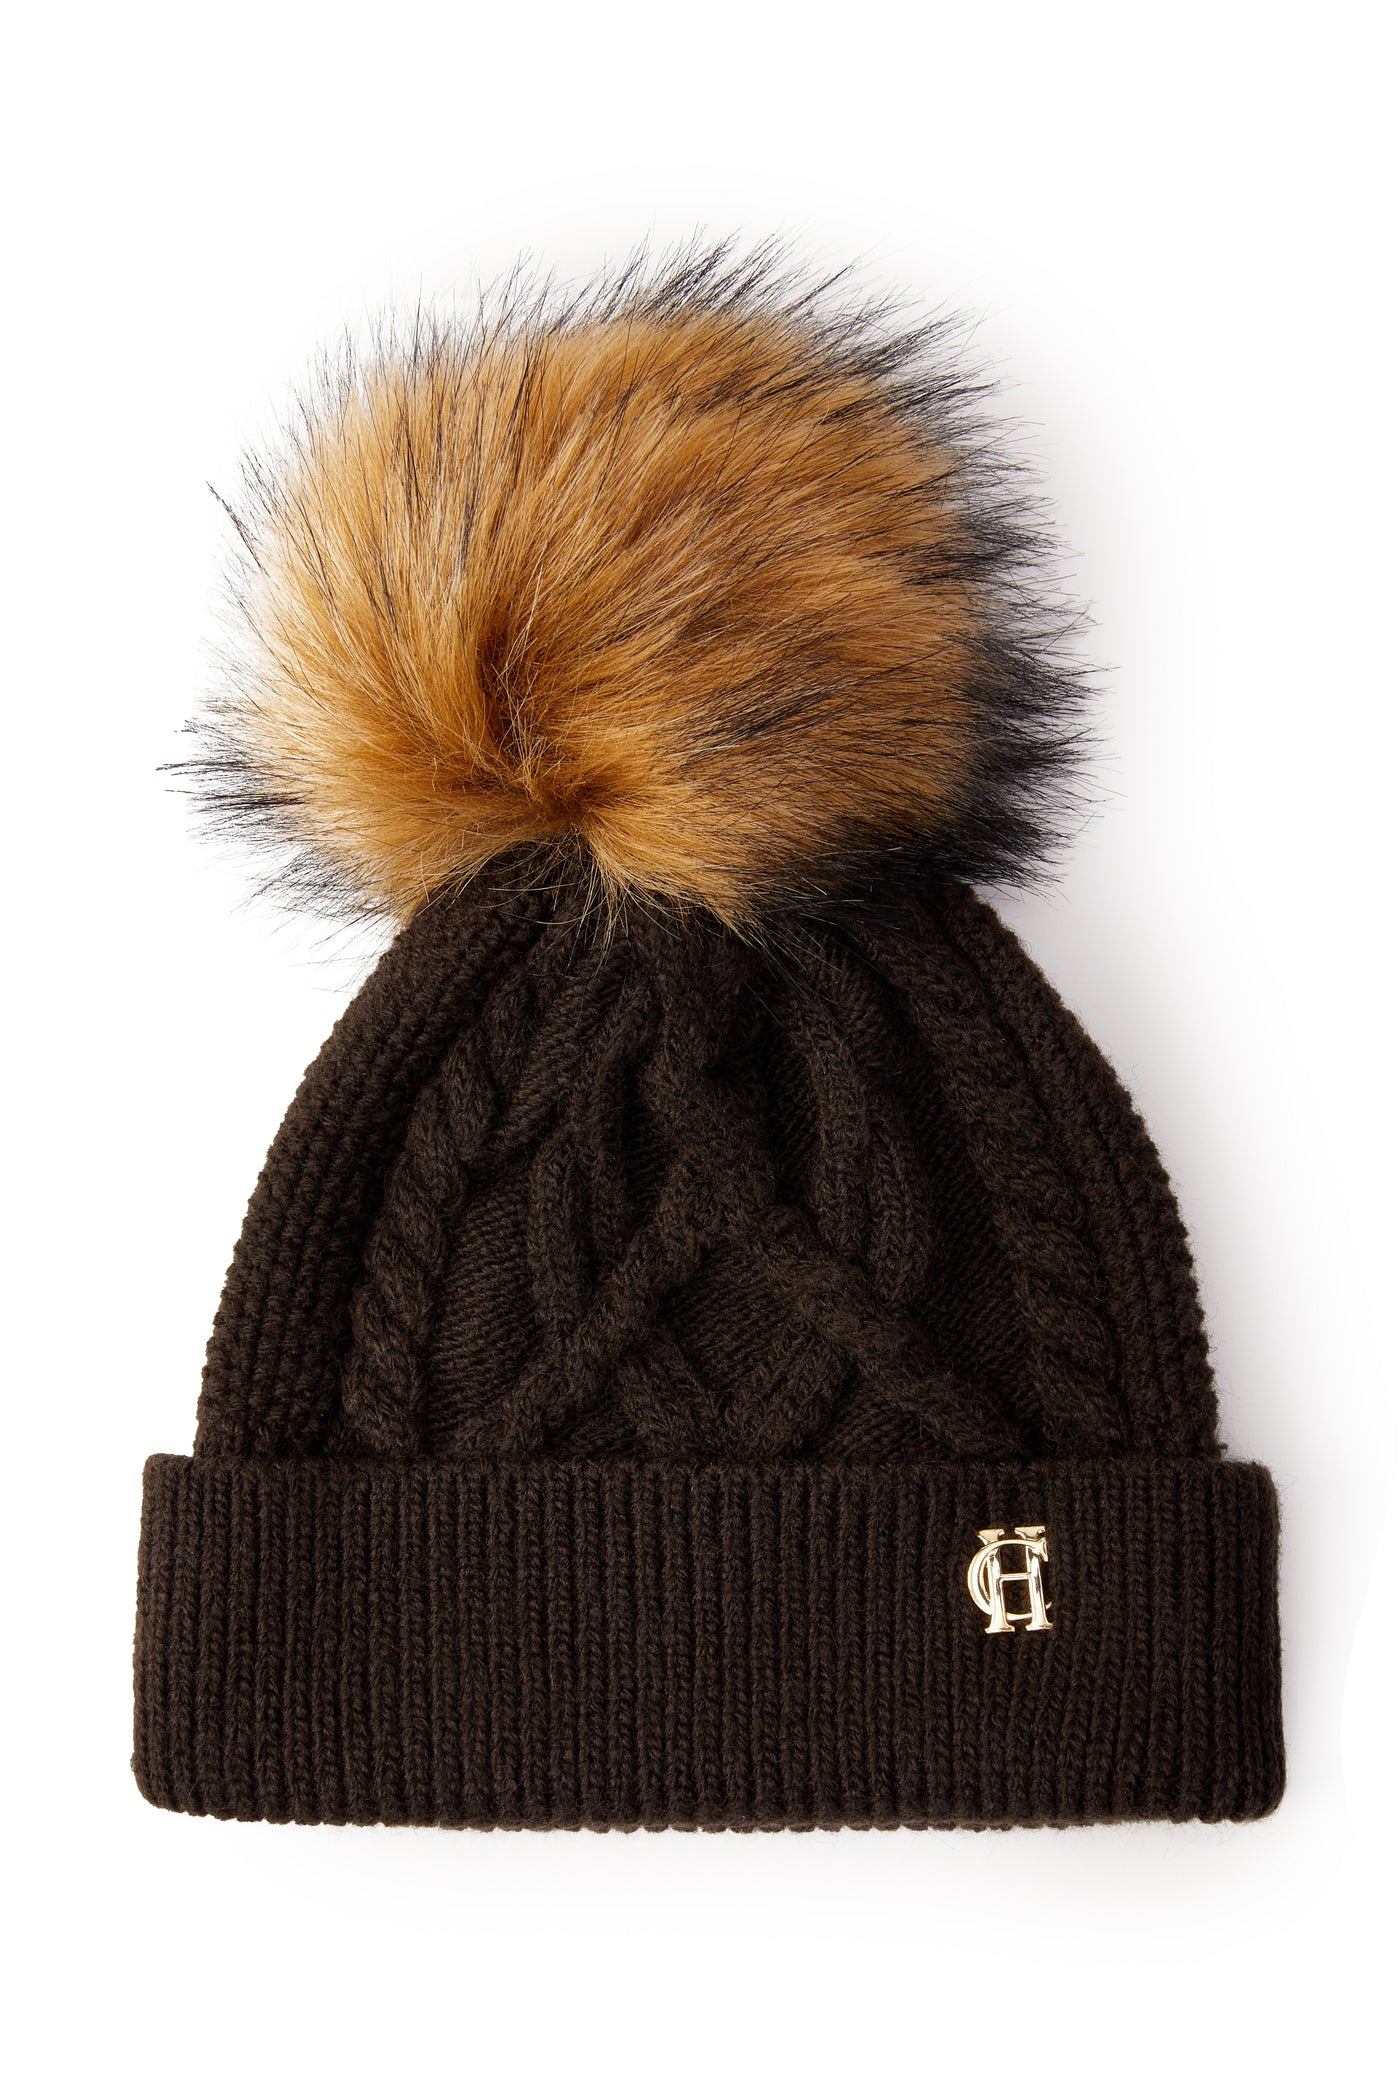 Holland Cooper Cortina Ladies Bobble Hat in Chocolate Front